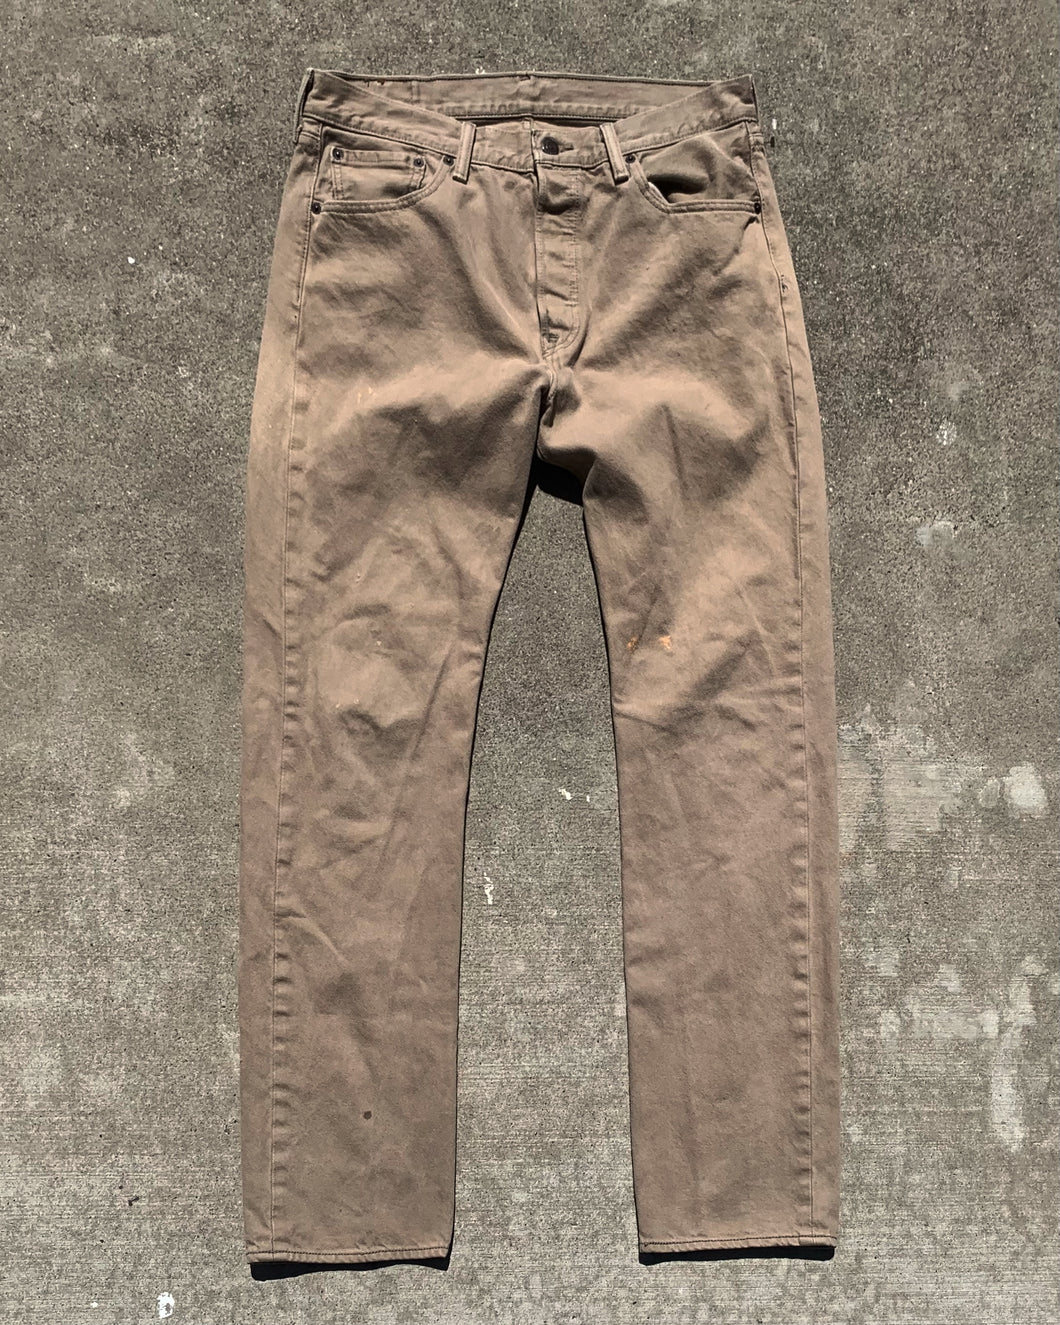 Levi's Lightly Painted and Distressed Beige Jeans